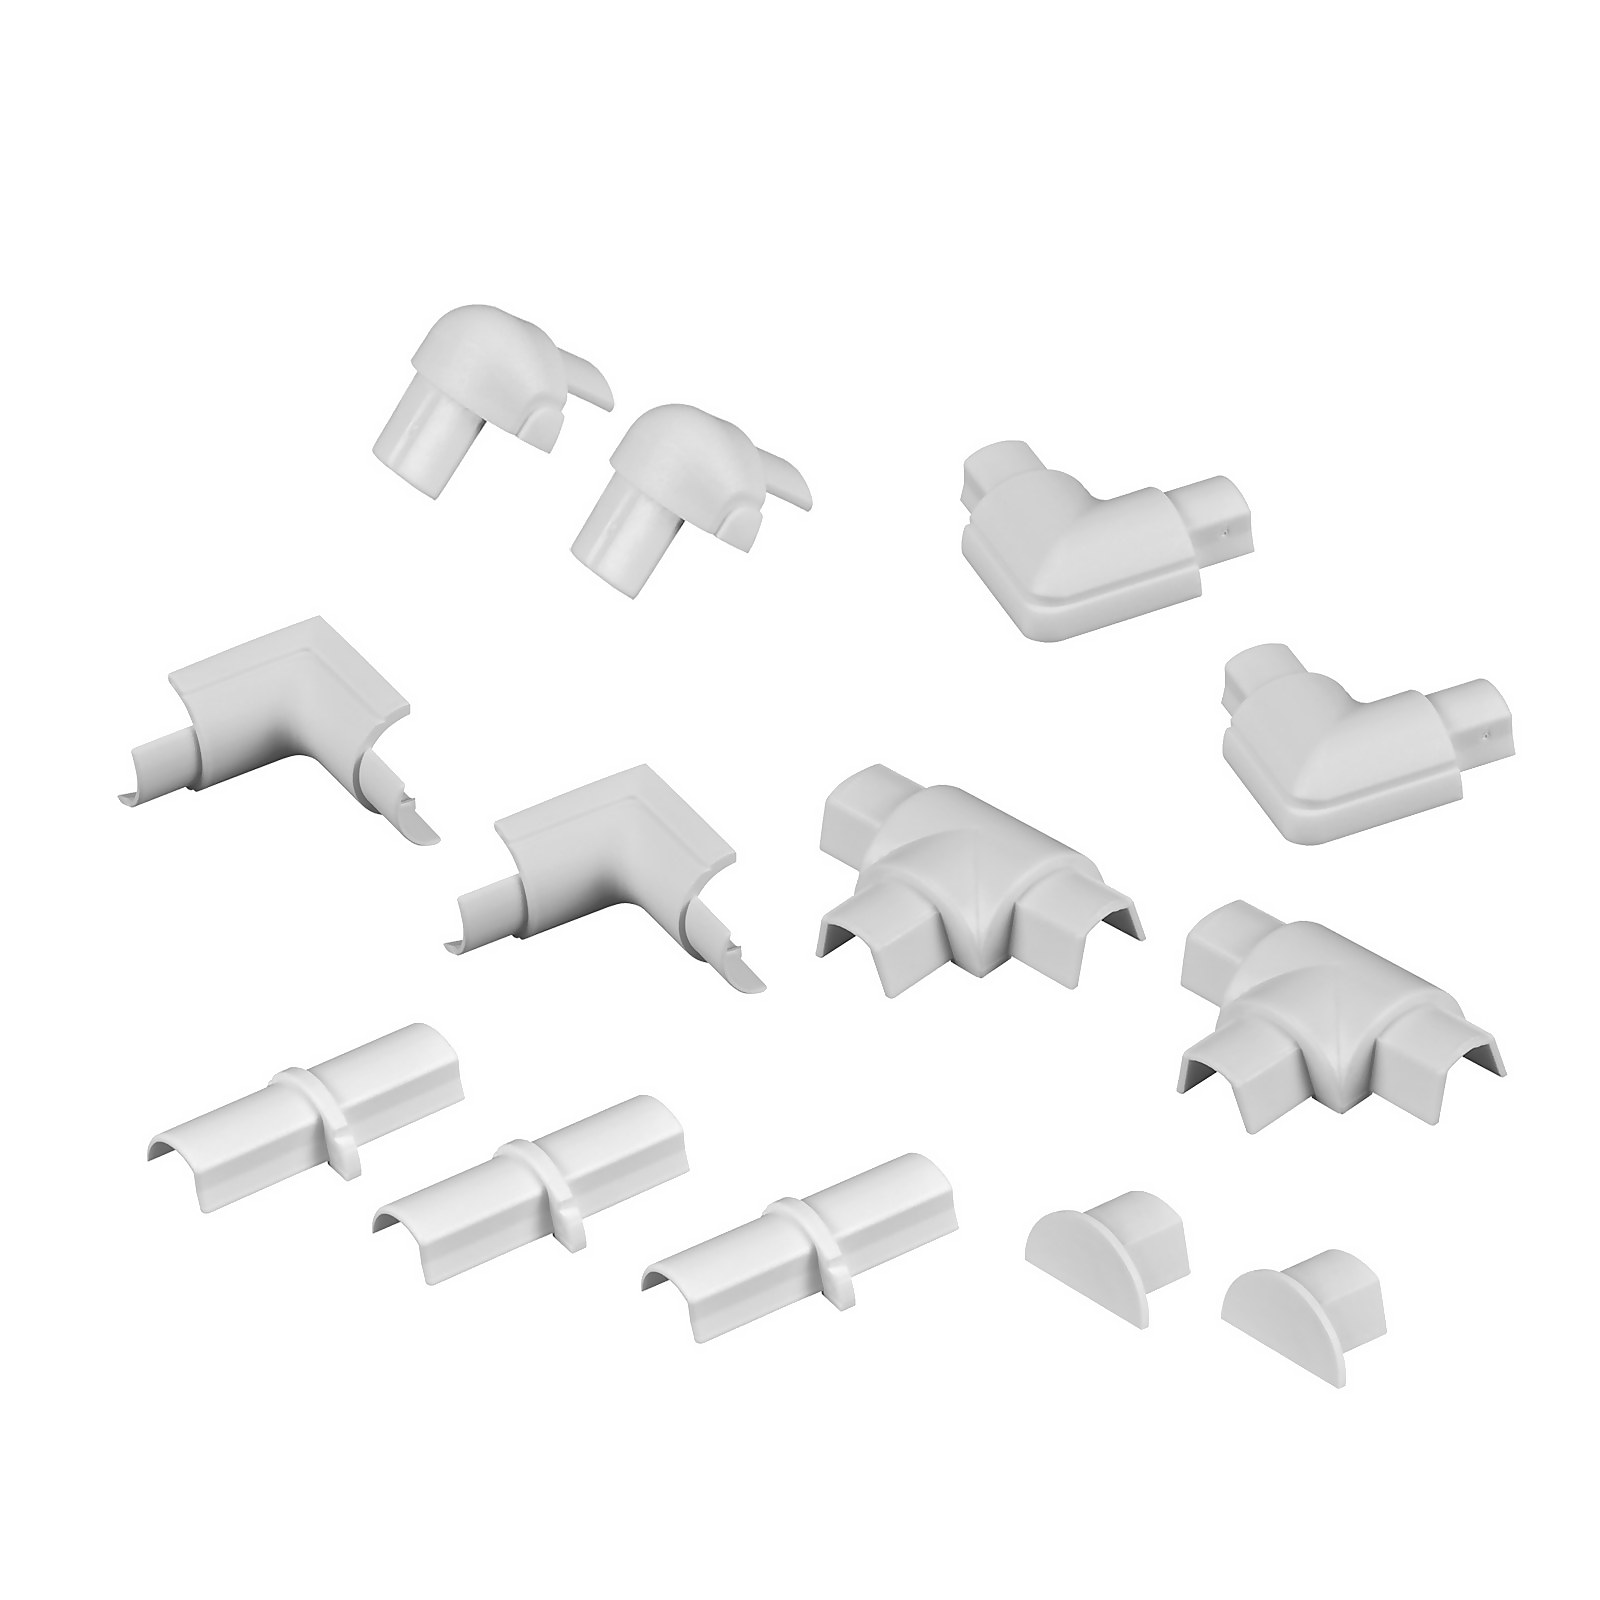 Photo of D-line Micro Decorative Trunking Smooth Fit 13 Piece Accessory Multipack 16mm X 8mm White